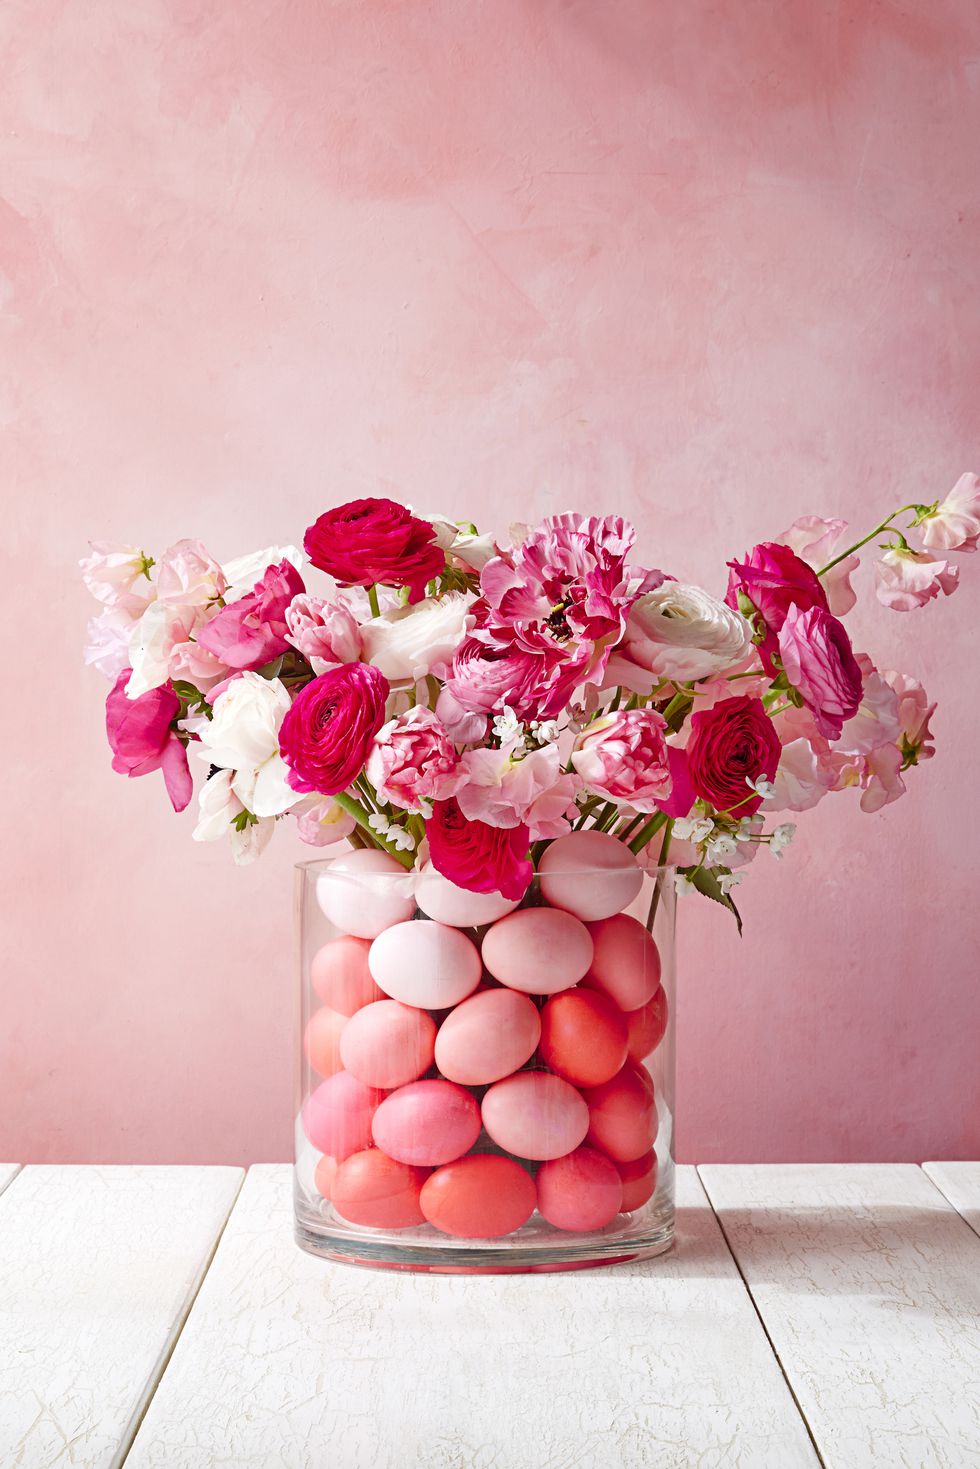 Easter decorations ideas